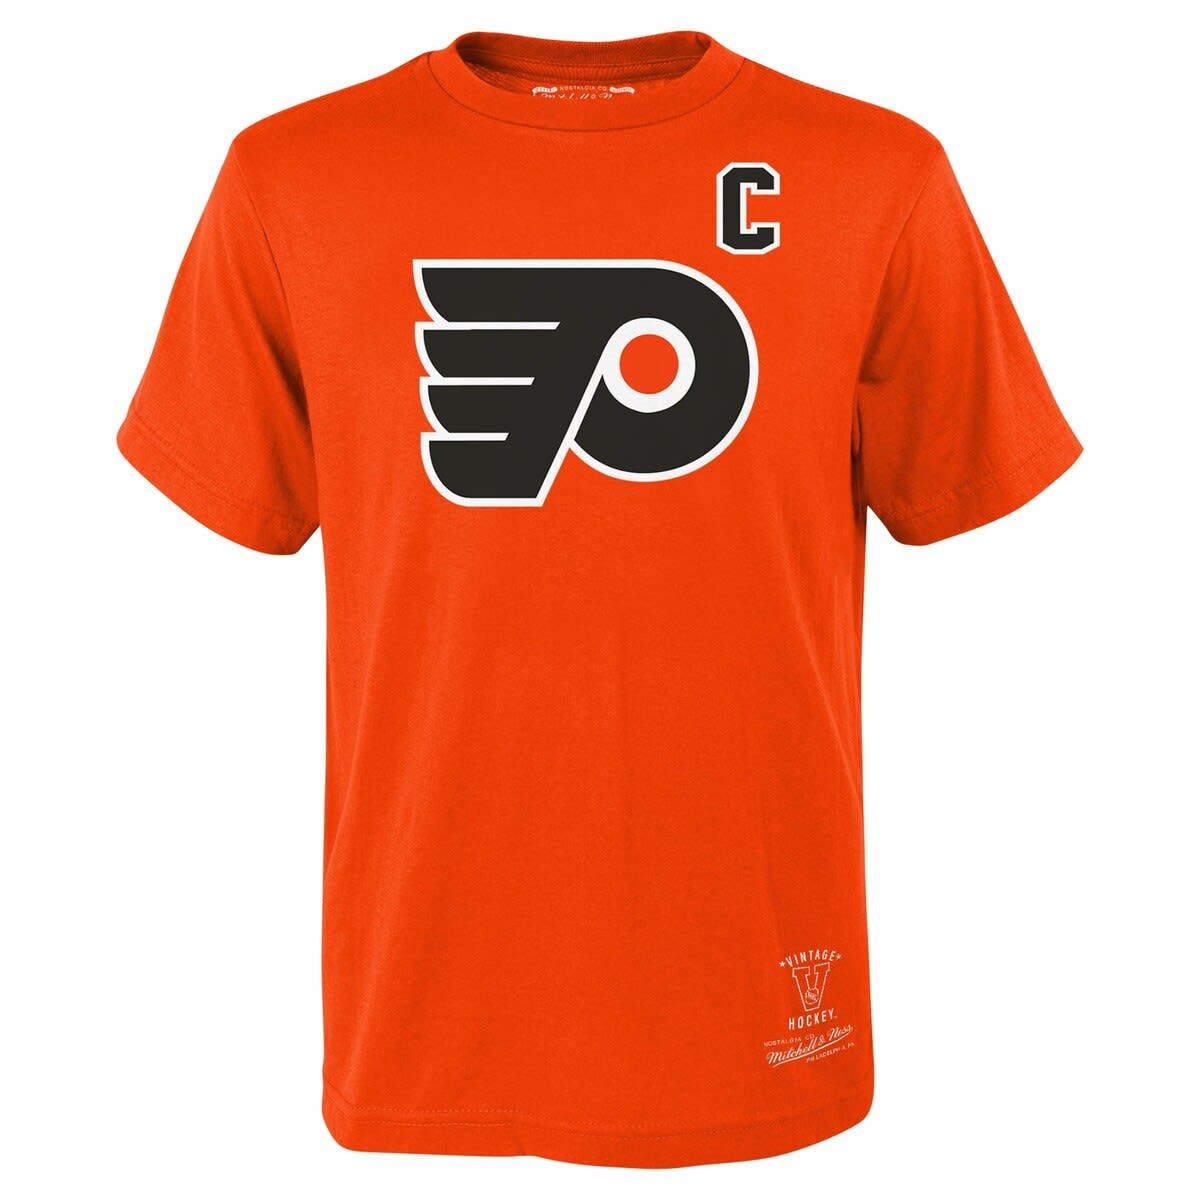 lindros flyers jersey